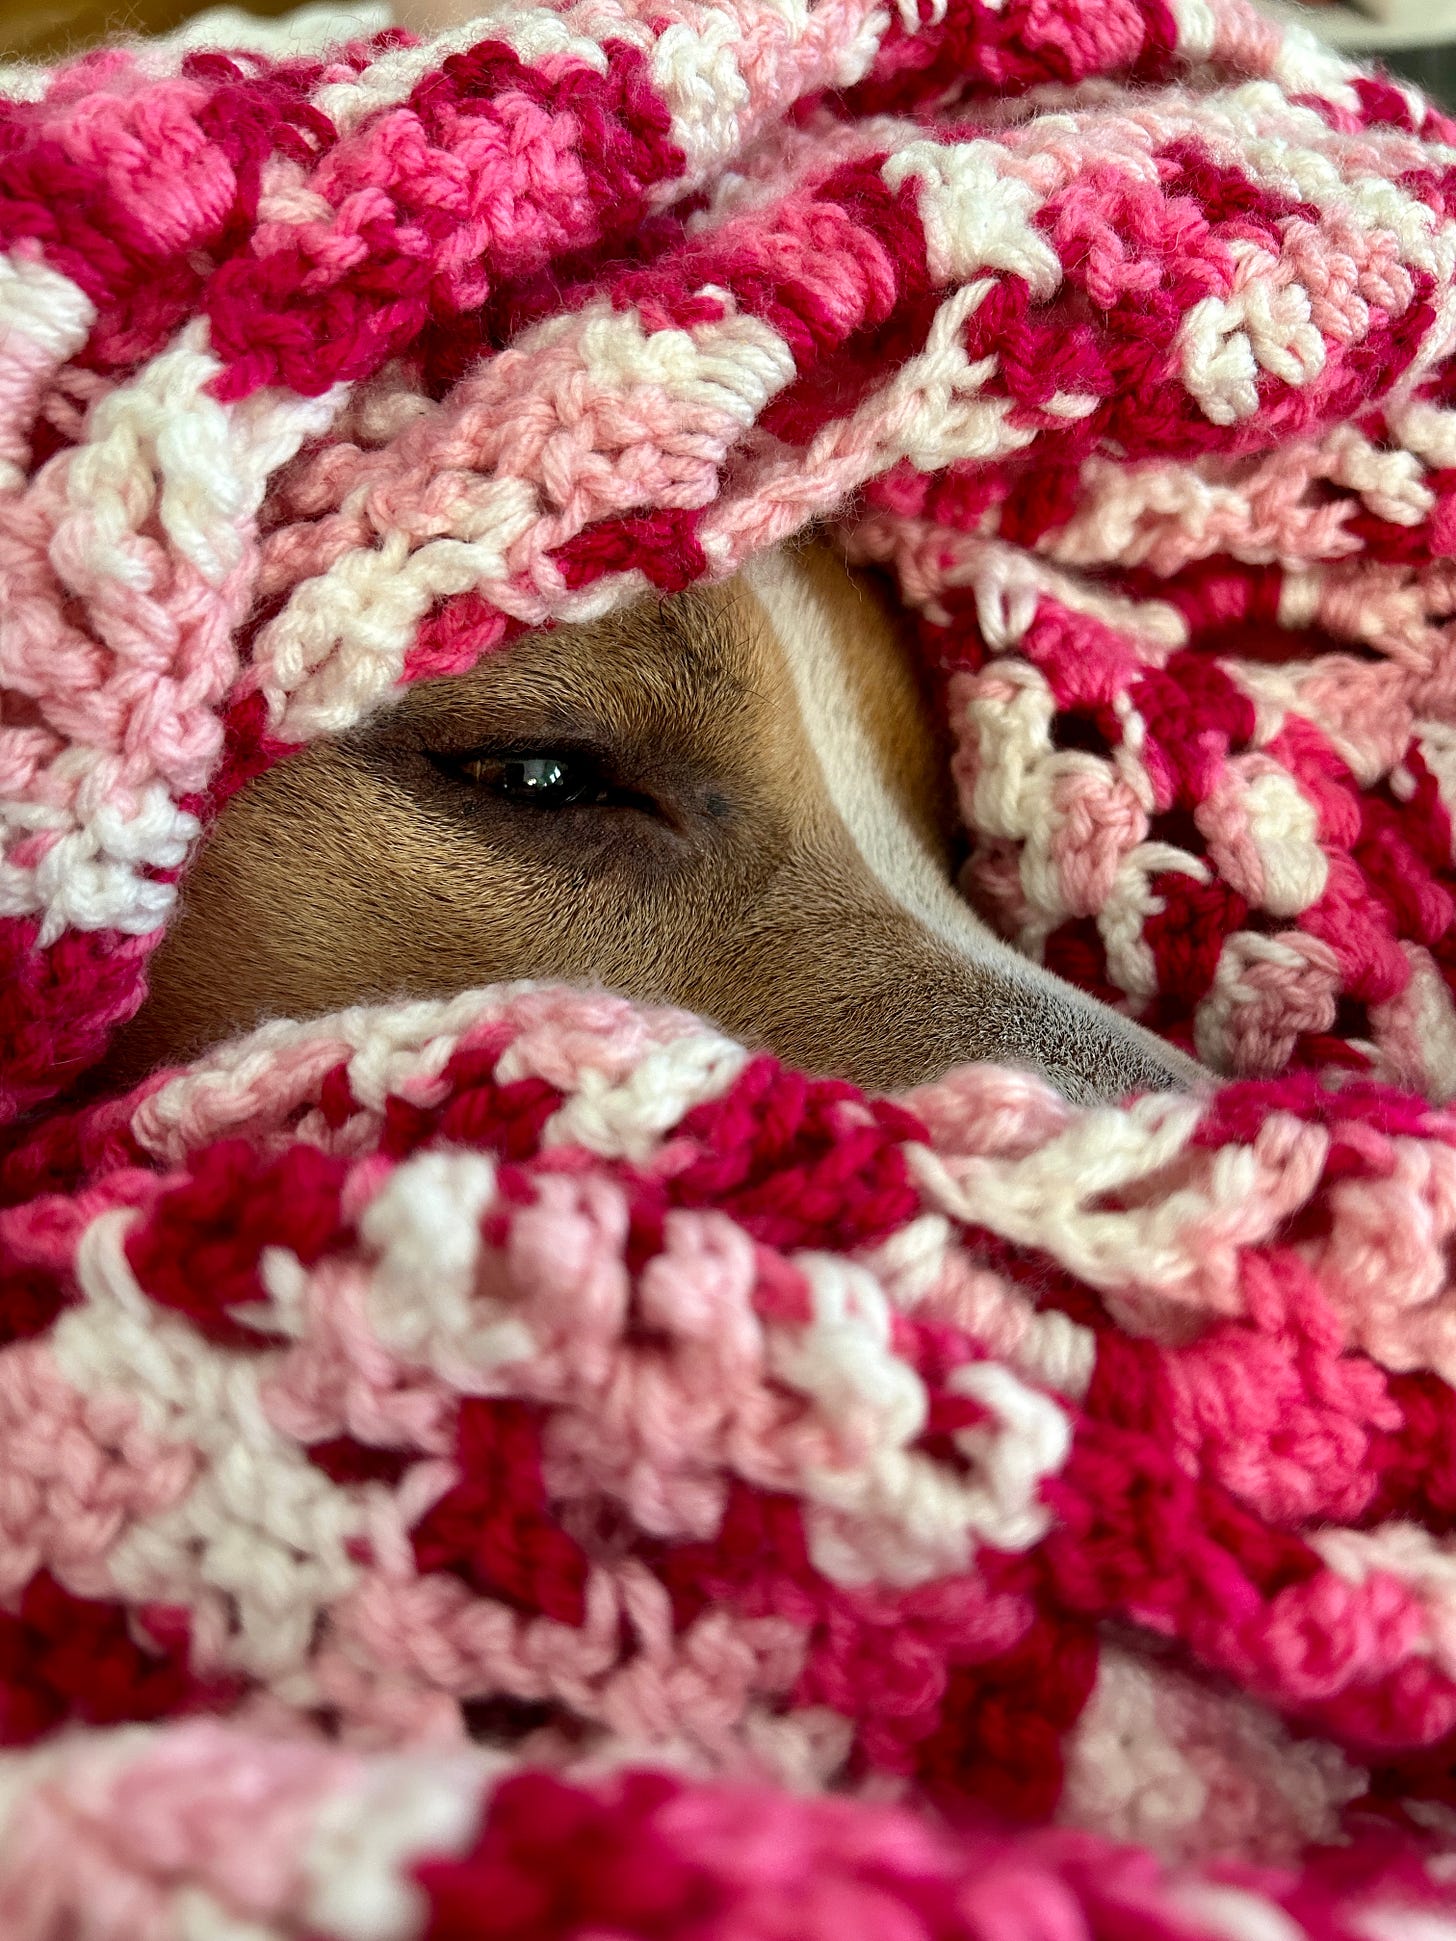 Elvis wrapped in a pink and white blanket